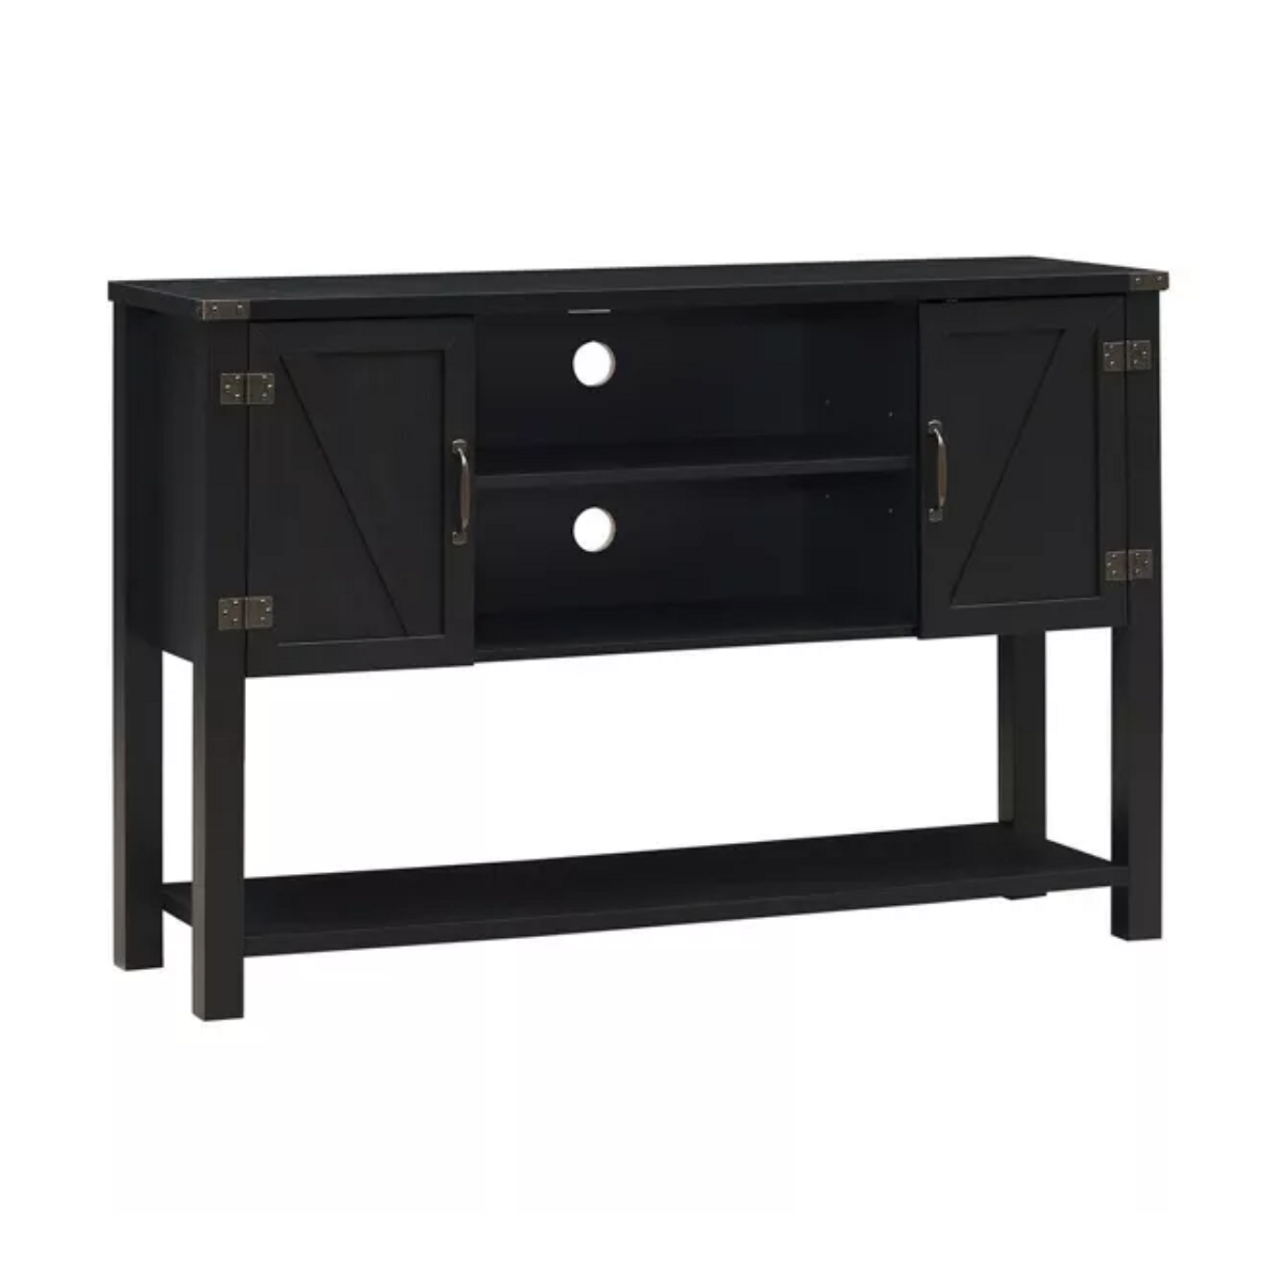 Costway Barn Door 60" TV Stand Console with Storage product image